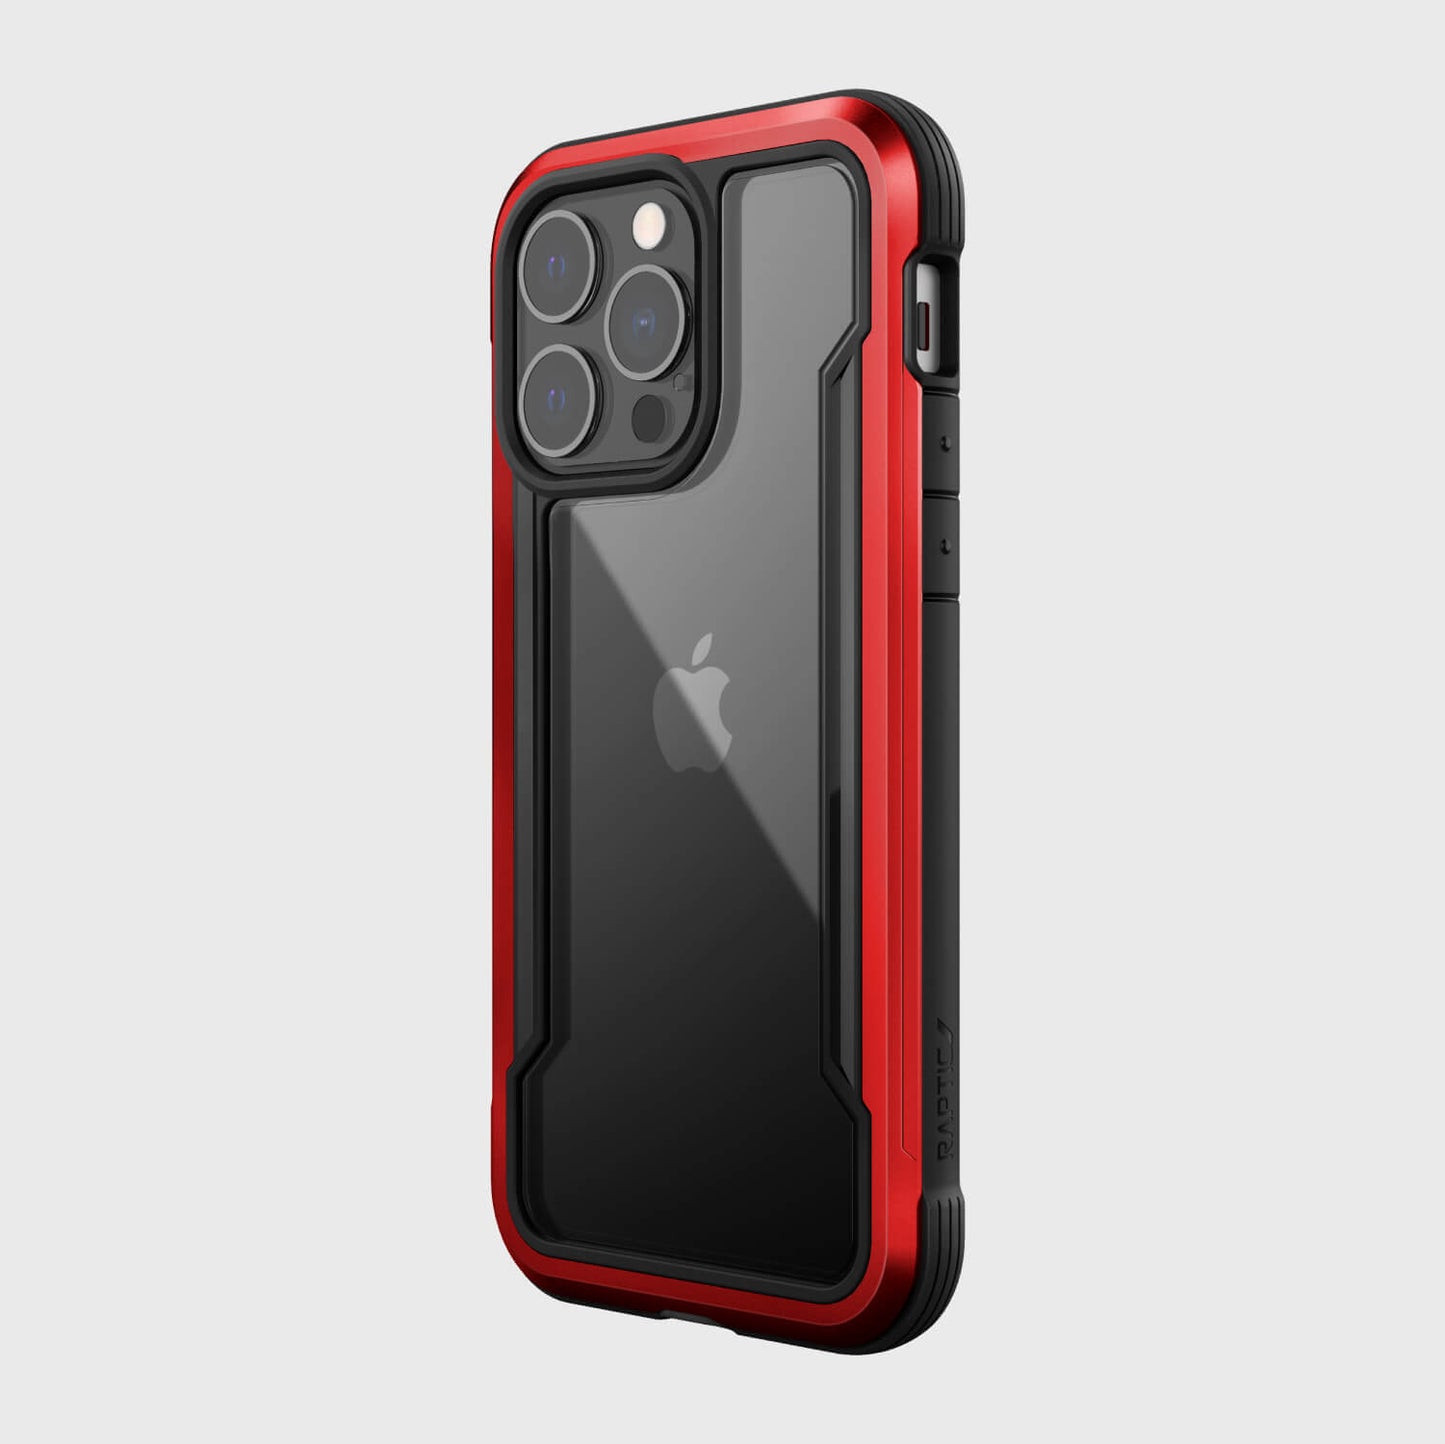 The SHIELD PRO case for iPhone 13 Pro Max offers drop protection and comes in red and black color options.